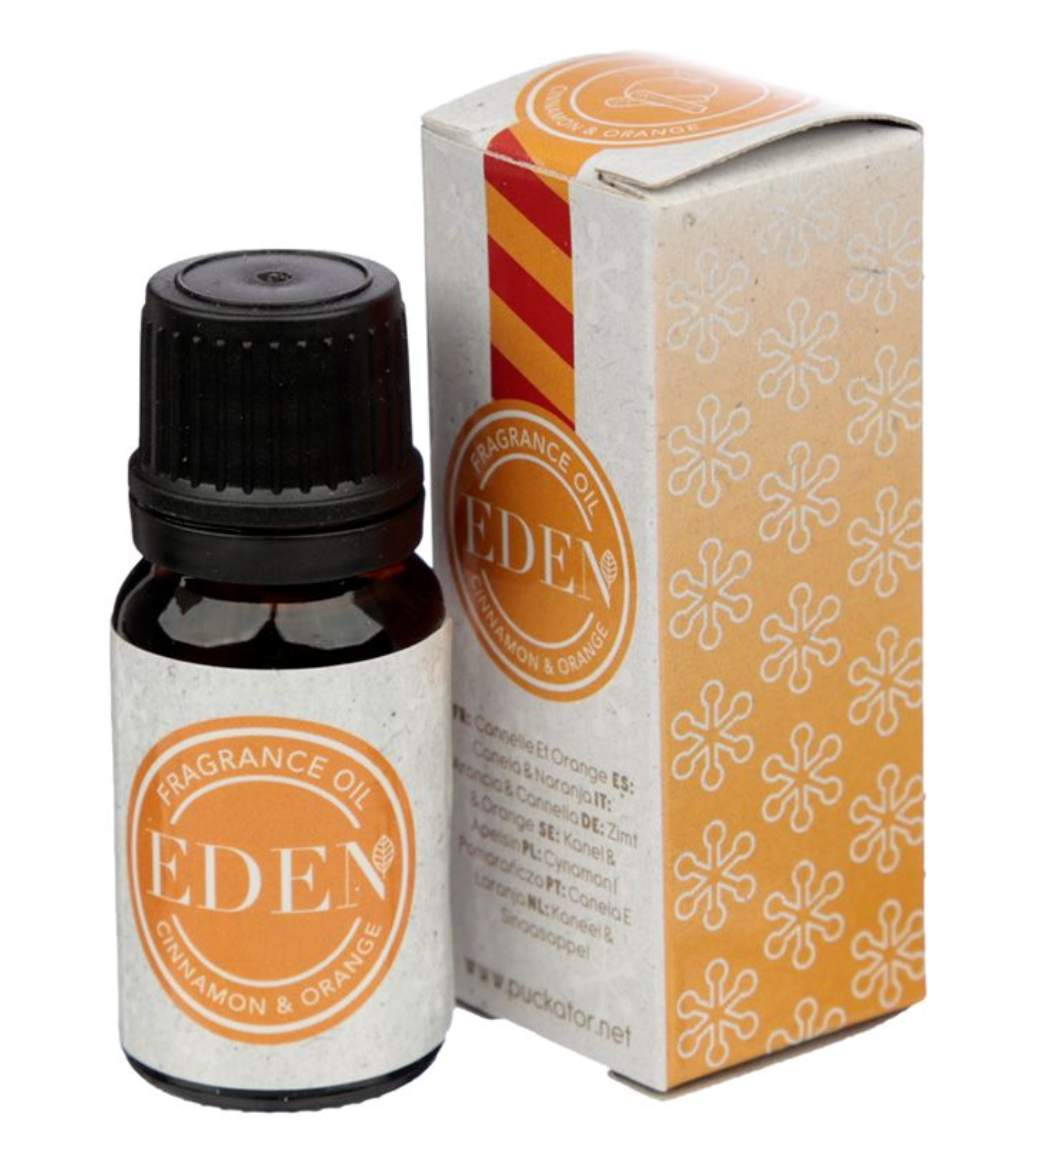 Cinnamon and Orange Fragrance Oil - 10ml-FREE Shipping over £30.00-